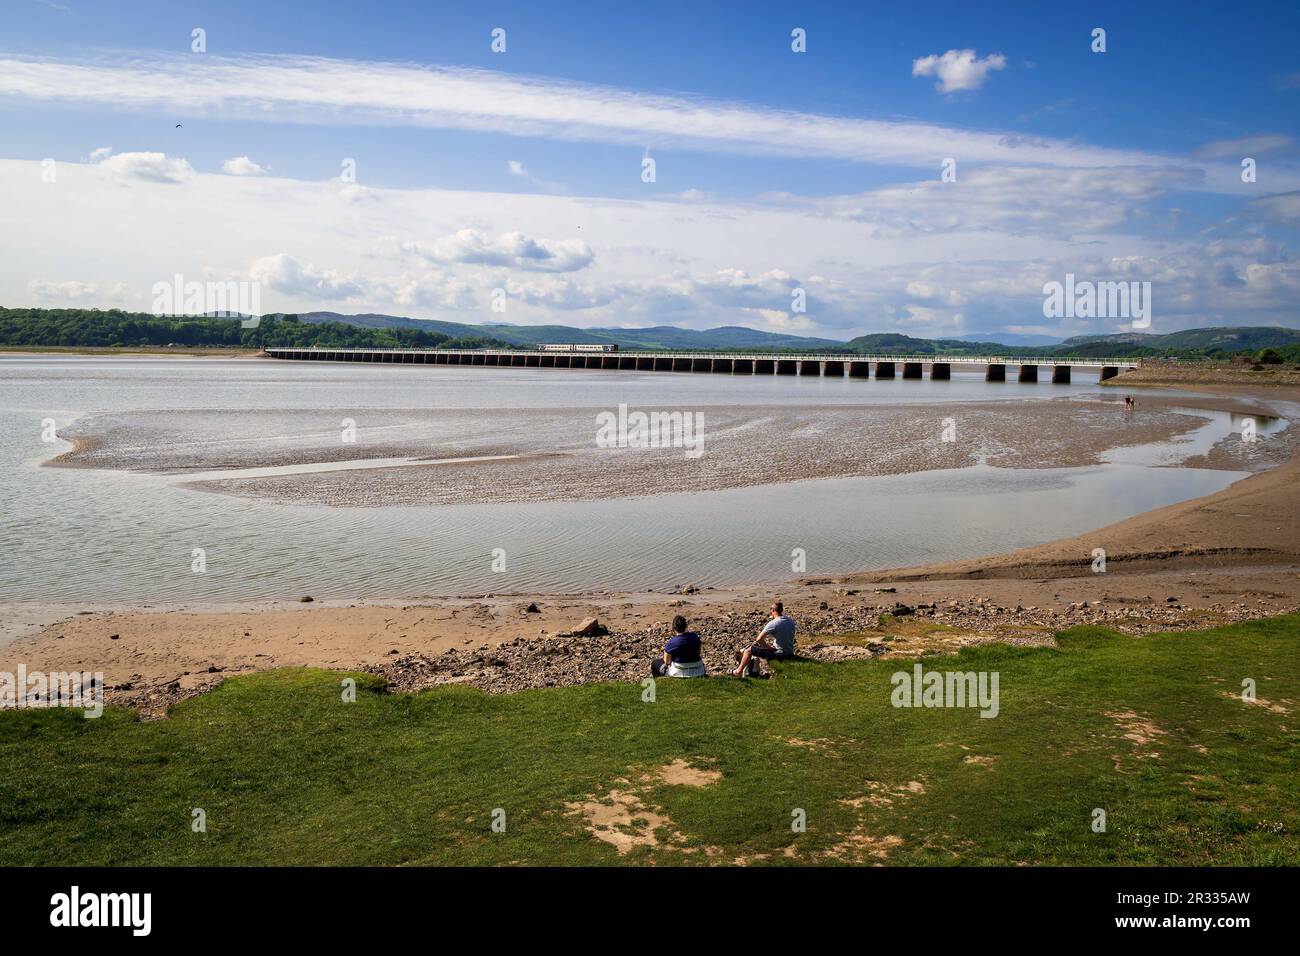 The river Kent estuary with a train passing over the Arnside viaduct. Stock Photo